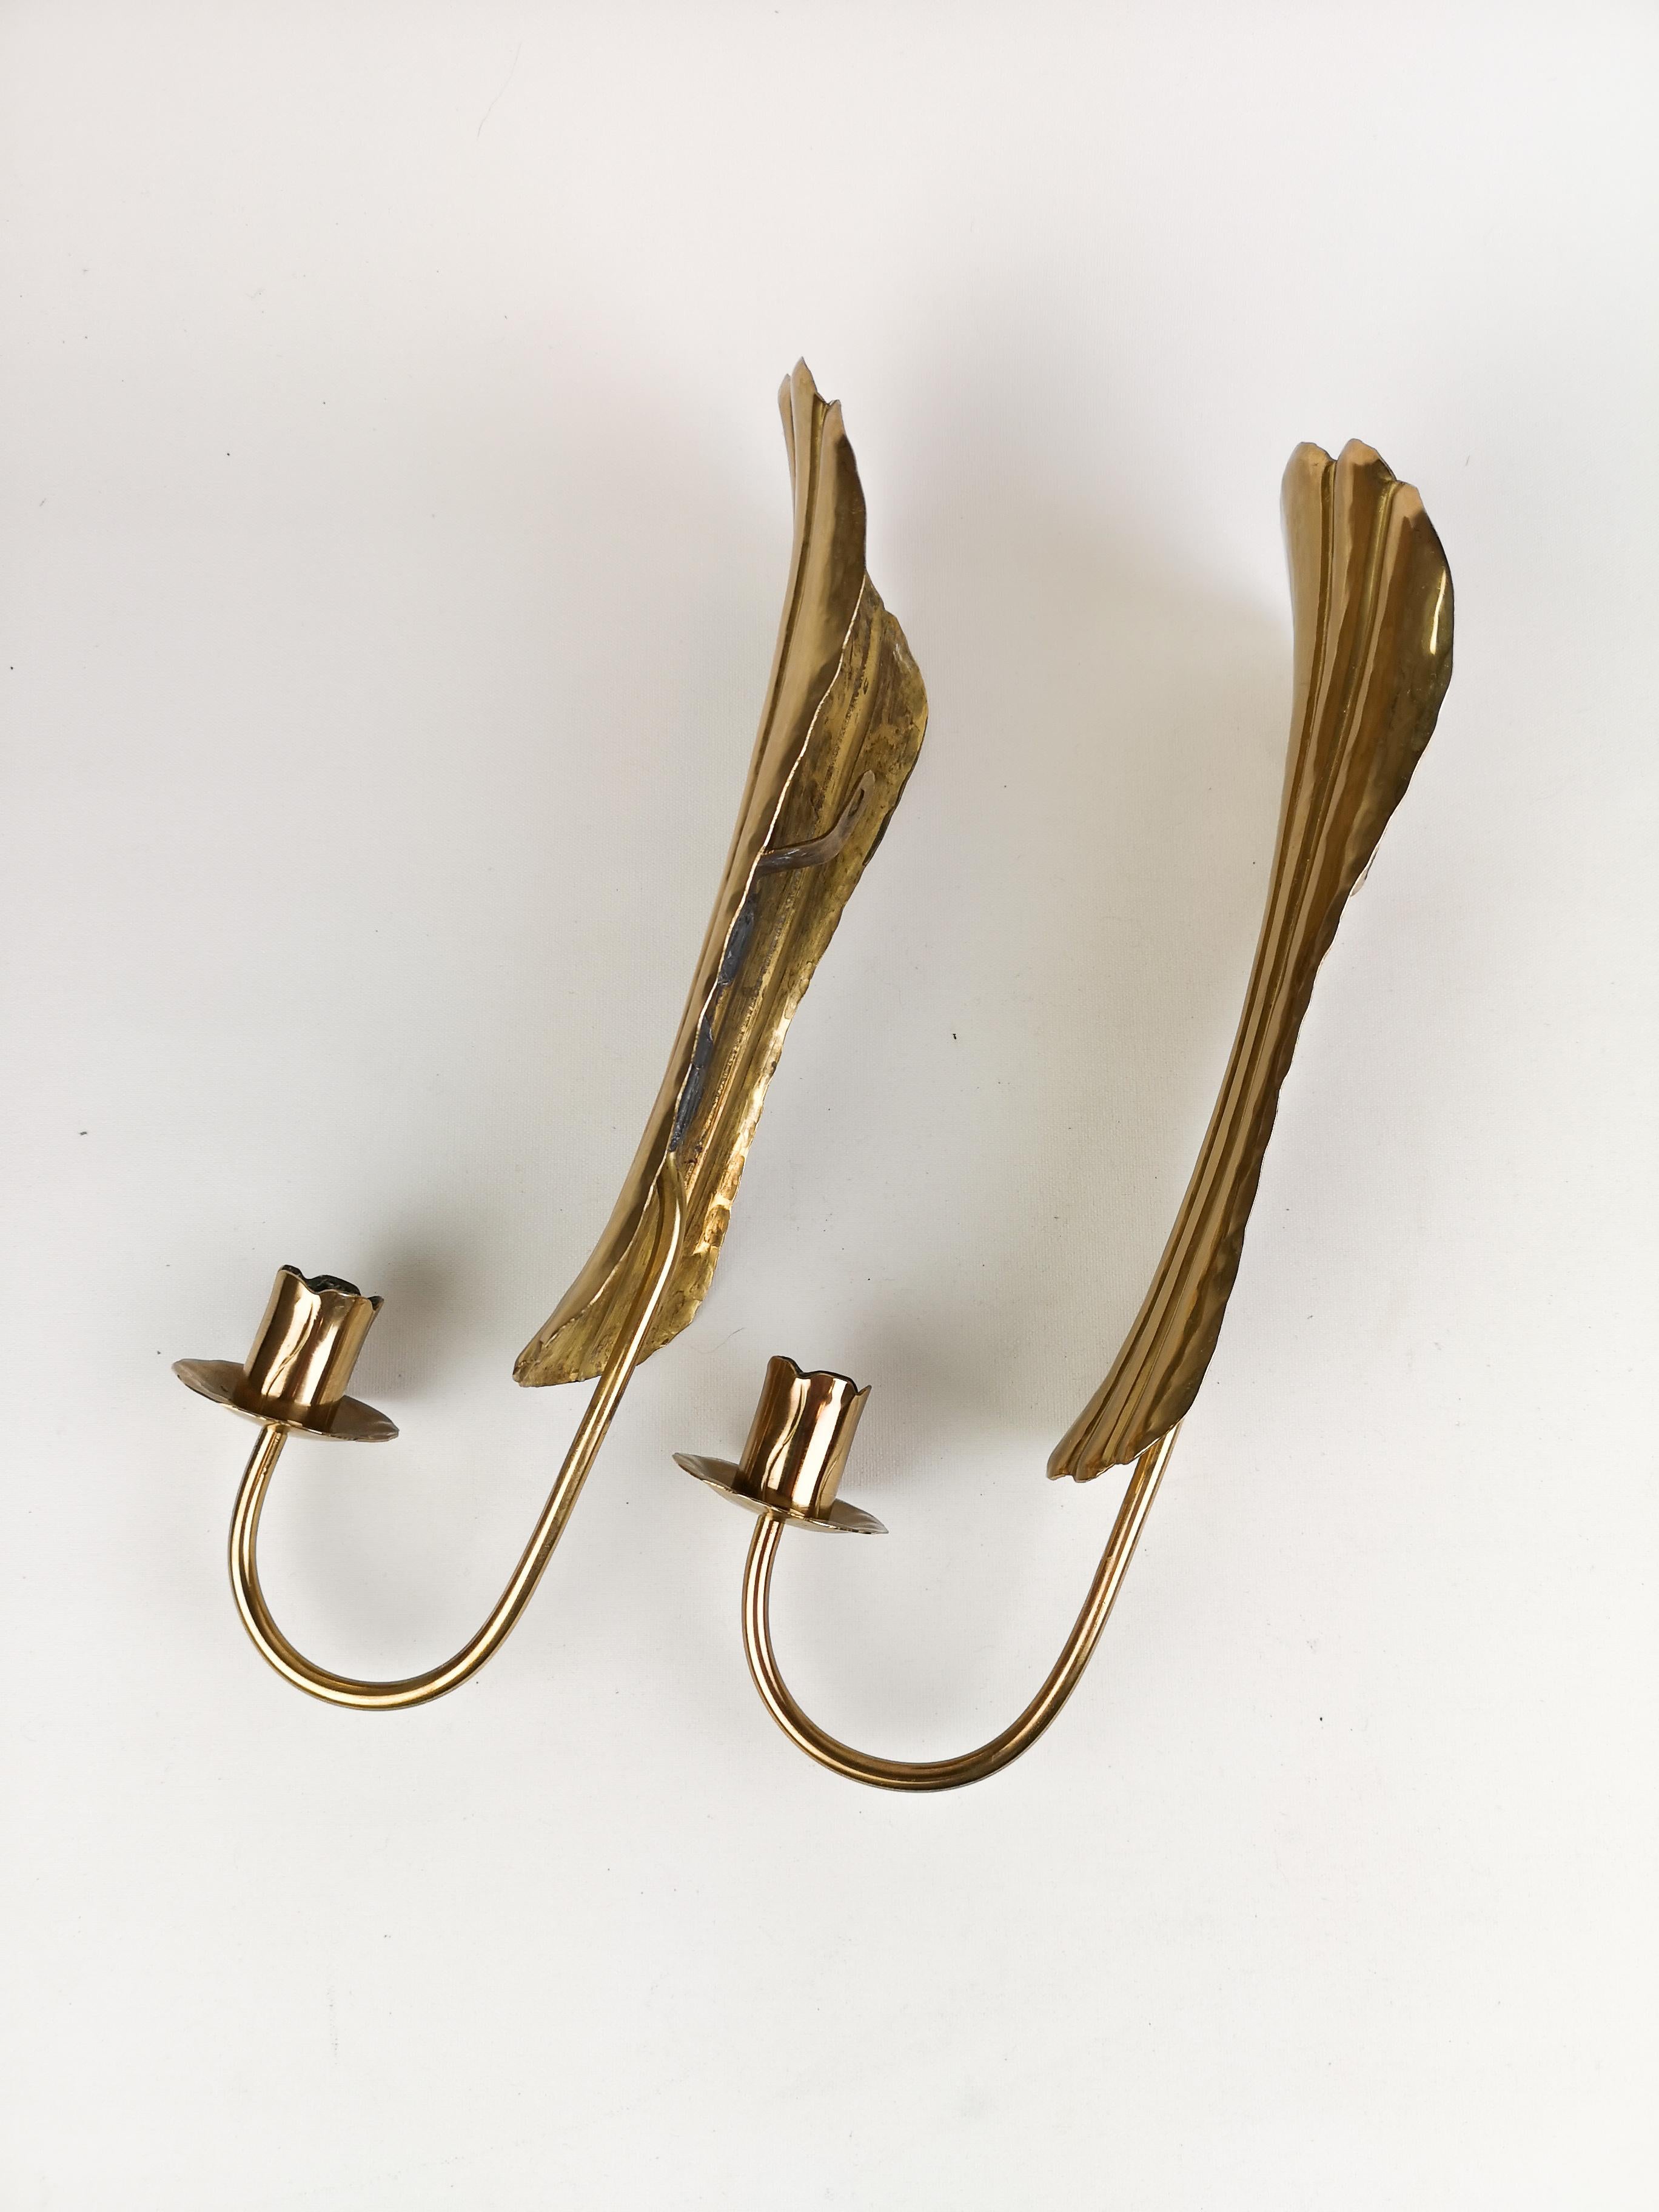 Midcentury Pair of Brass Wall Candlesticks, Sweden, 1960s For Sale 1